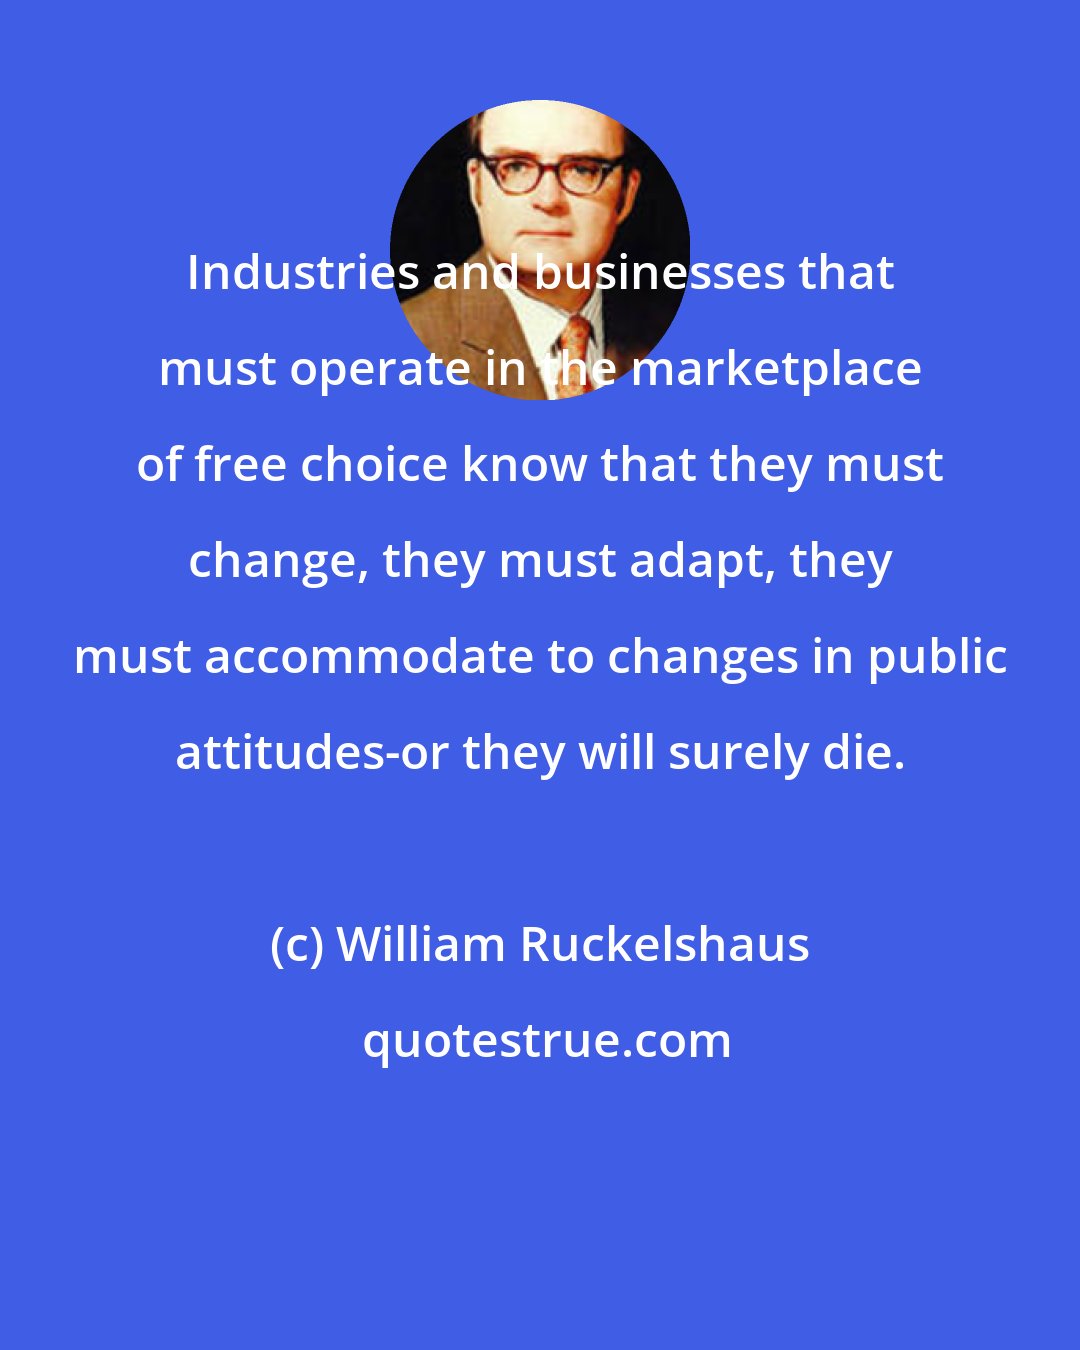 William Ruckelshaus: Industries and businesses that must operate in the marketplace of free choice know that they must change, they must adapt, they must accommodate to changes in public attitudes-or they will surely die.